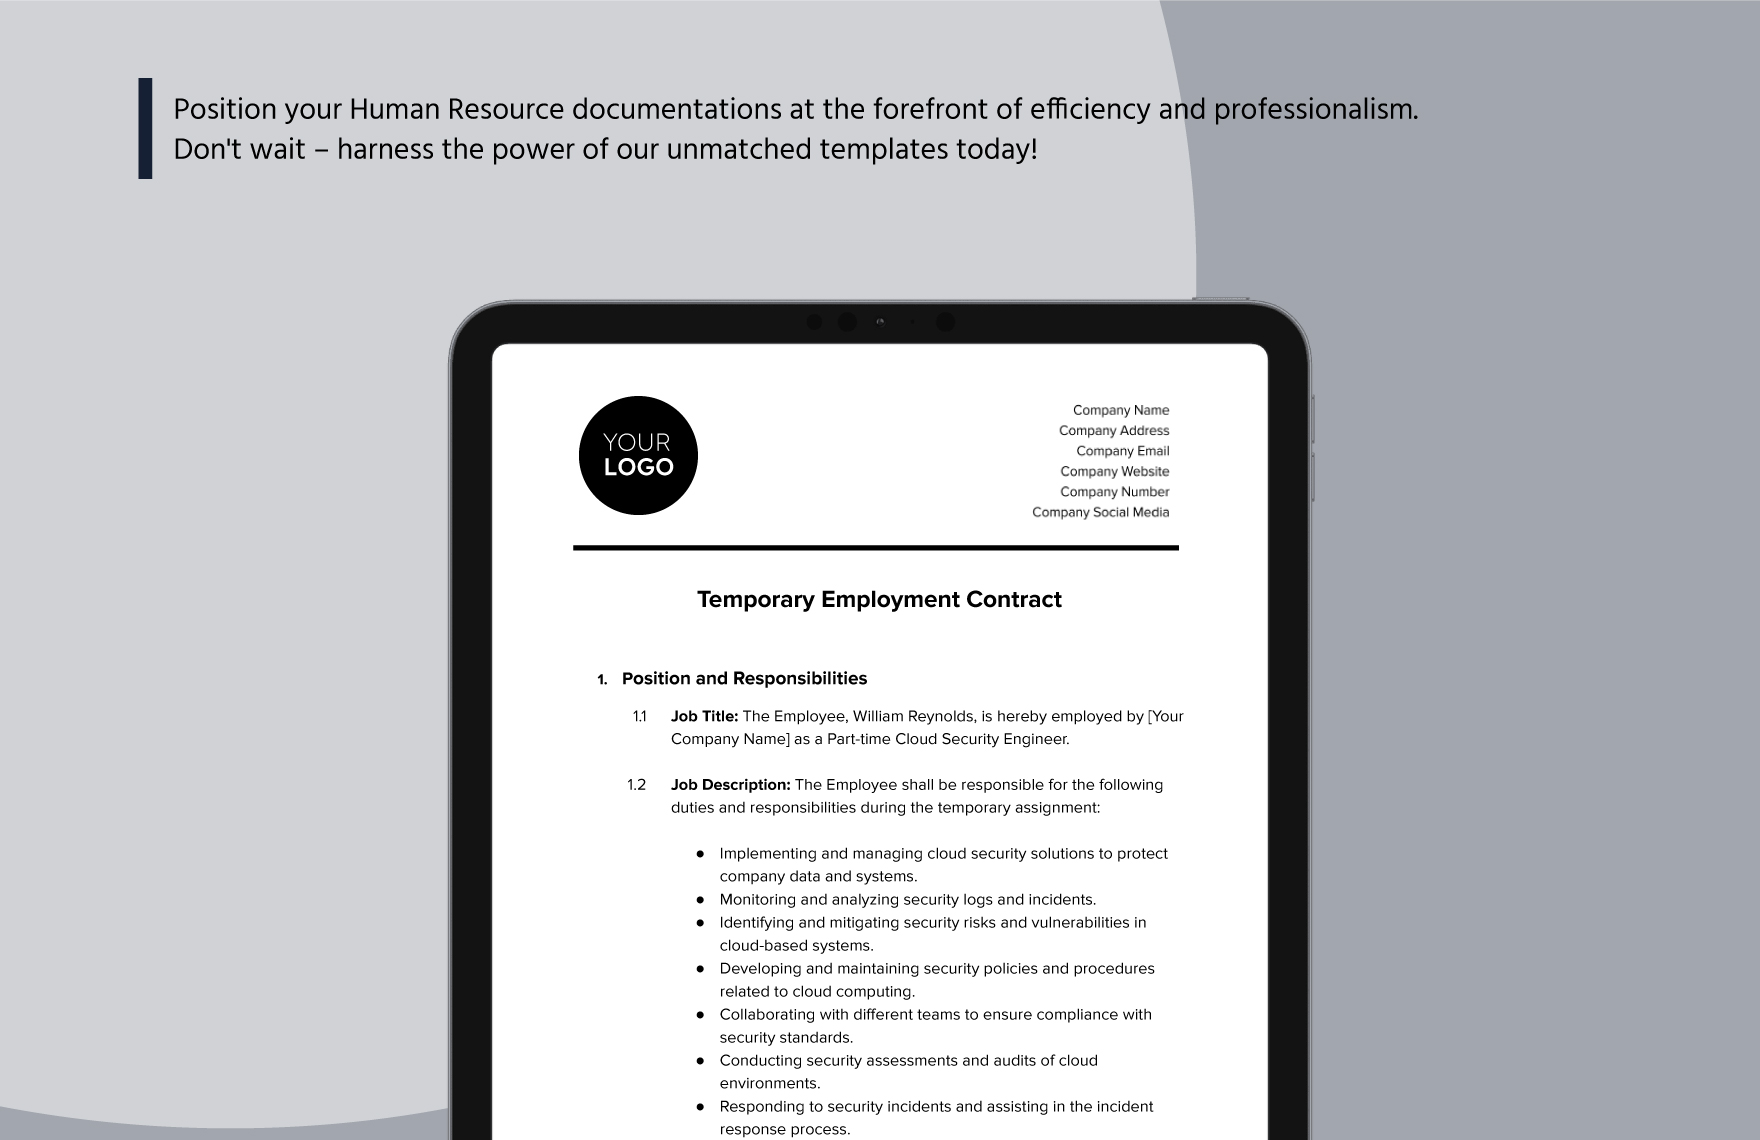 Temporary Employment Contract HR Template